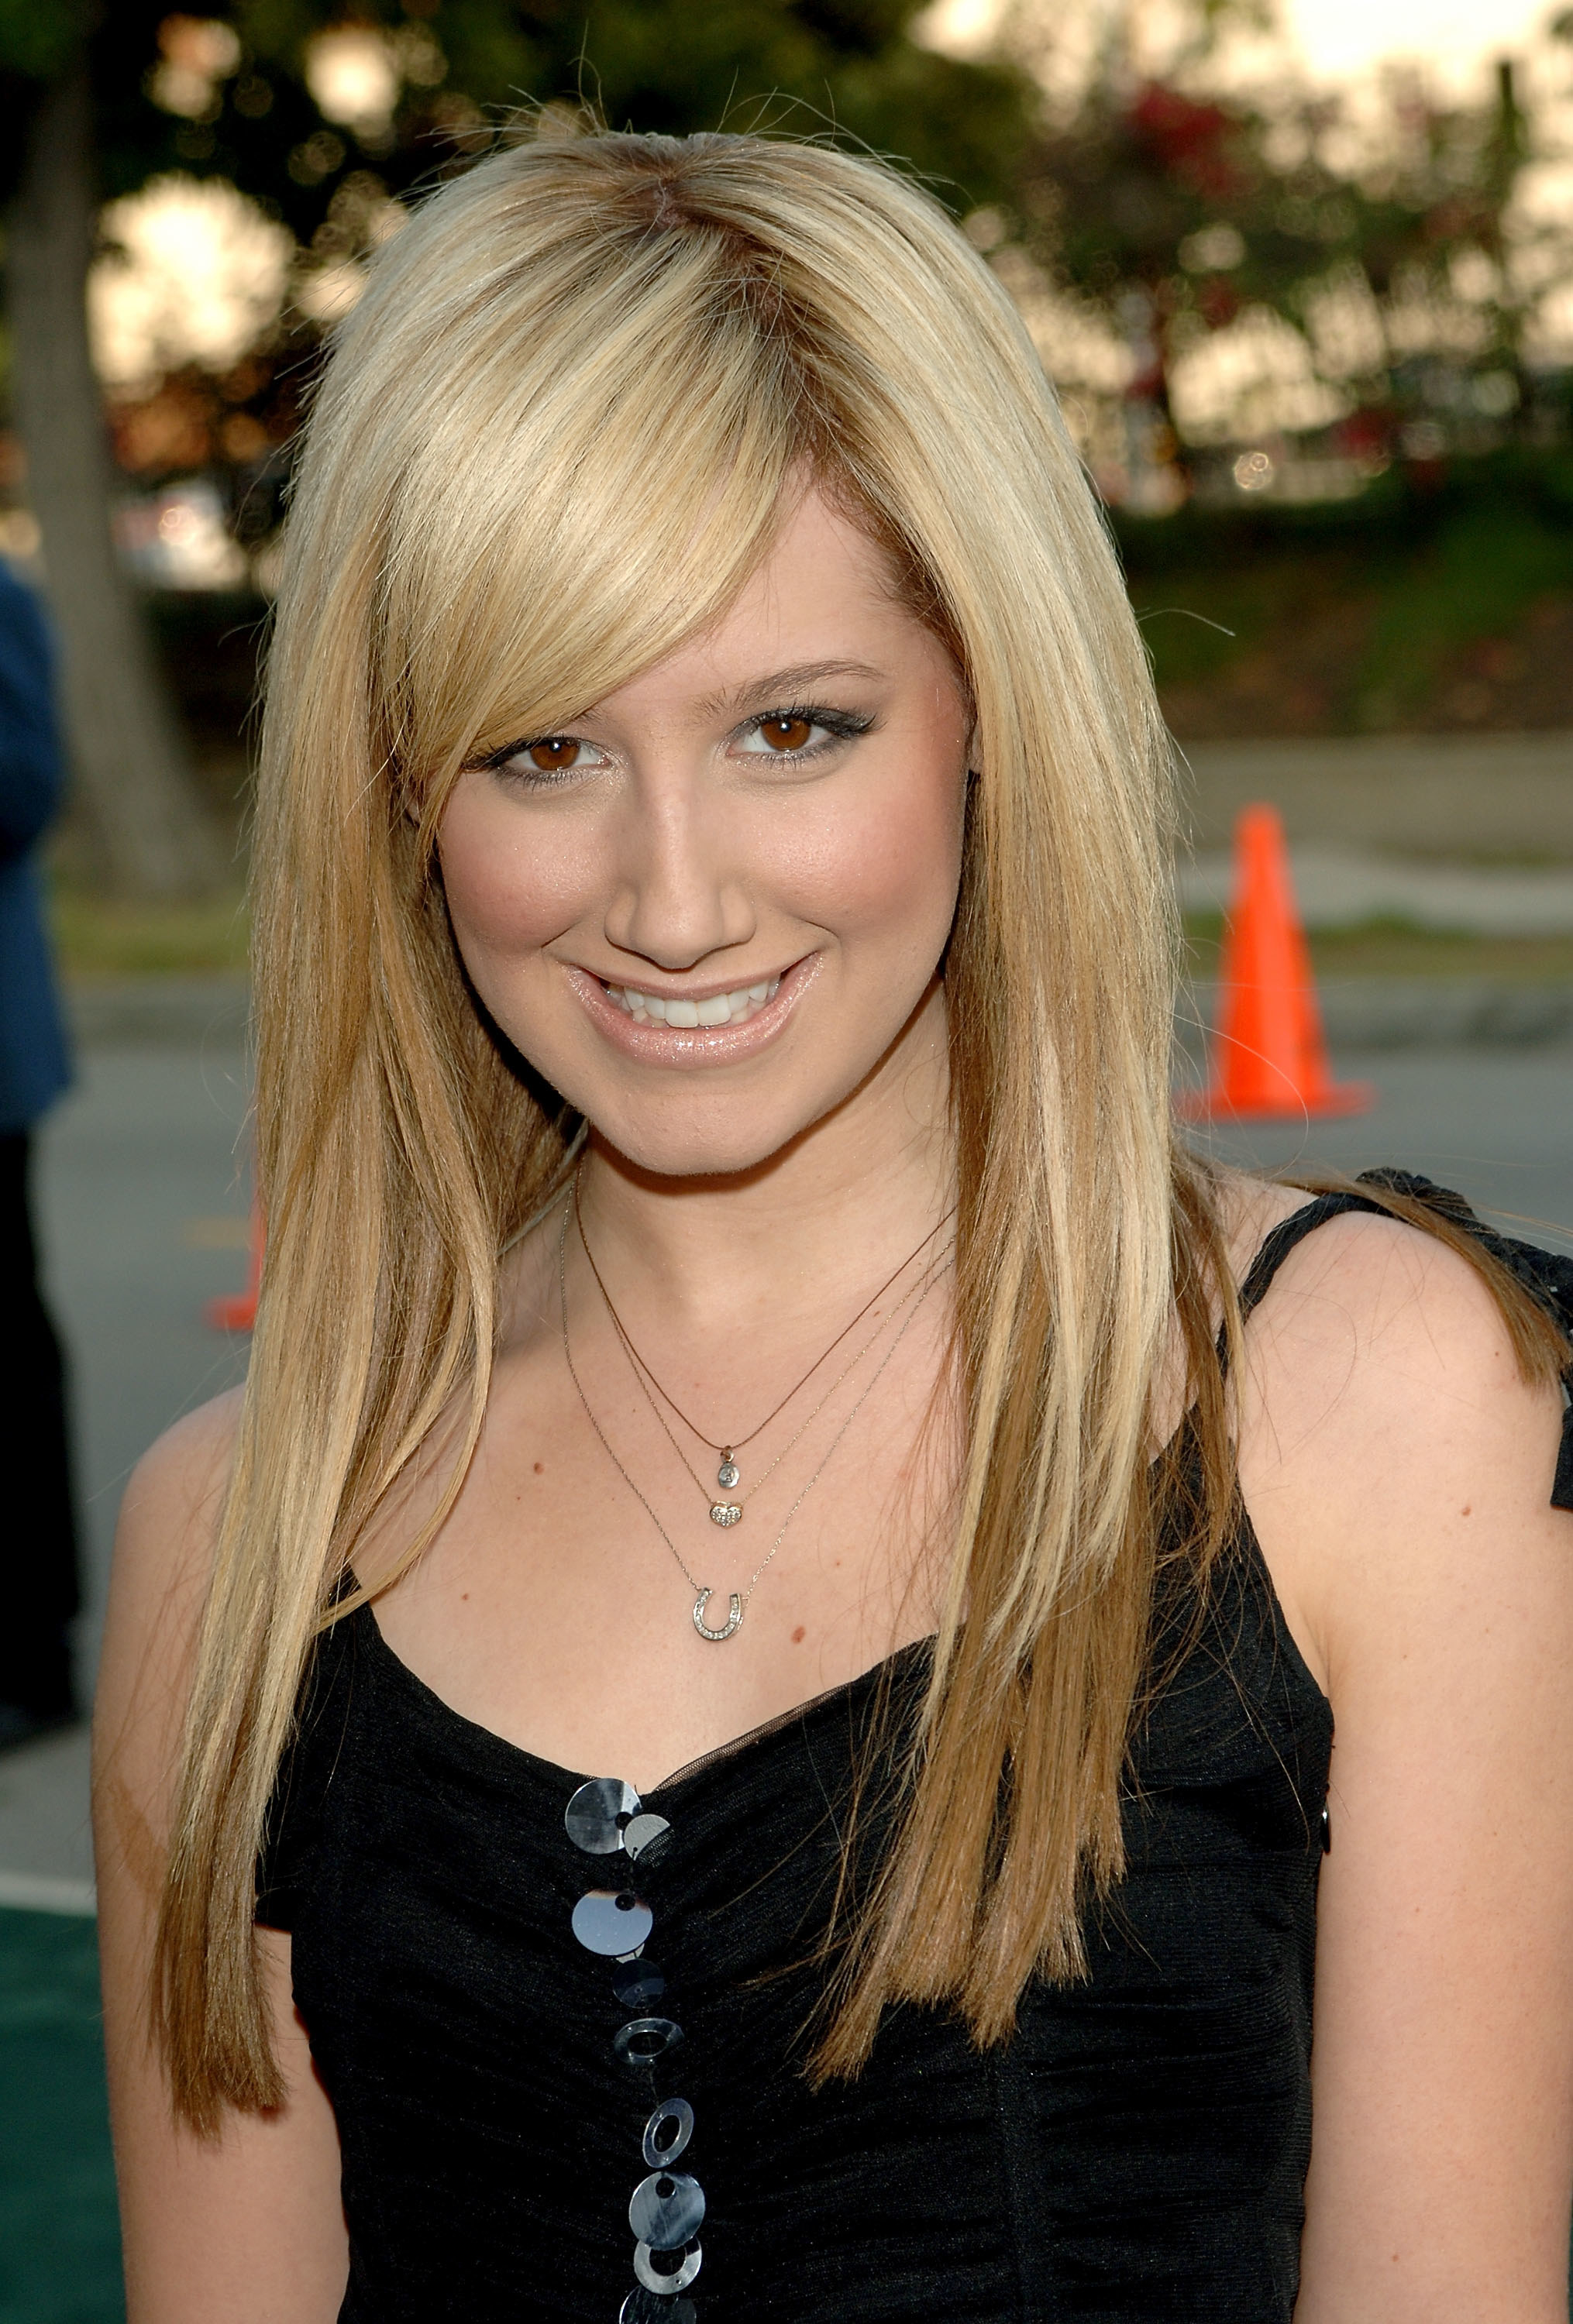 Actress Ashley Tisdale attends the 15th Annual Environmental Media Awards in 2005